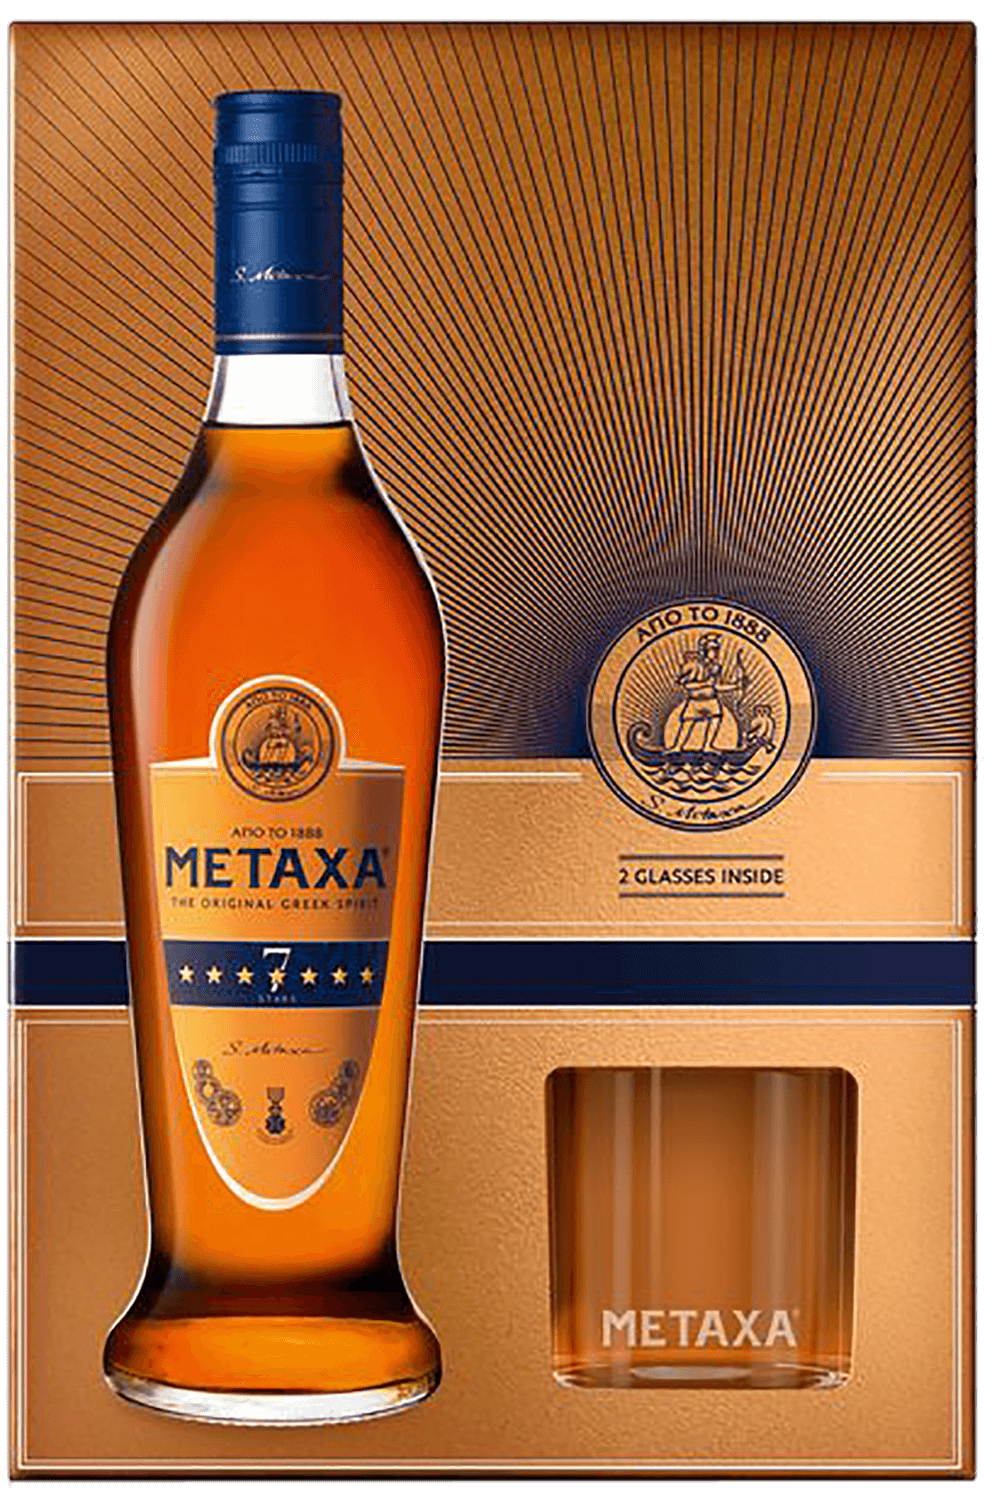 Metaxa 7 stars (gift box with two glasses) drappier carte d’or brut champagne aop in gift box with two glasses